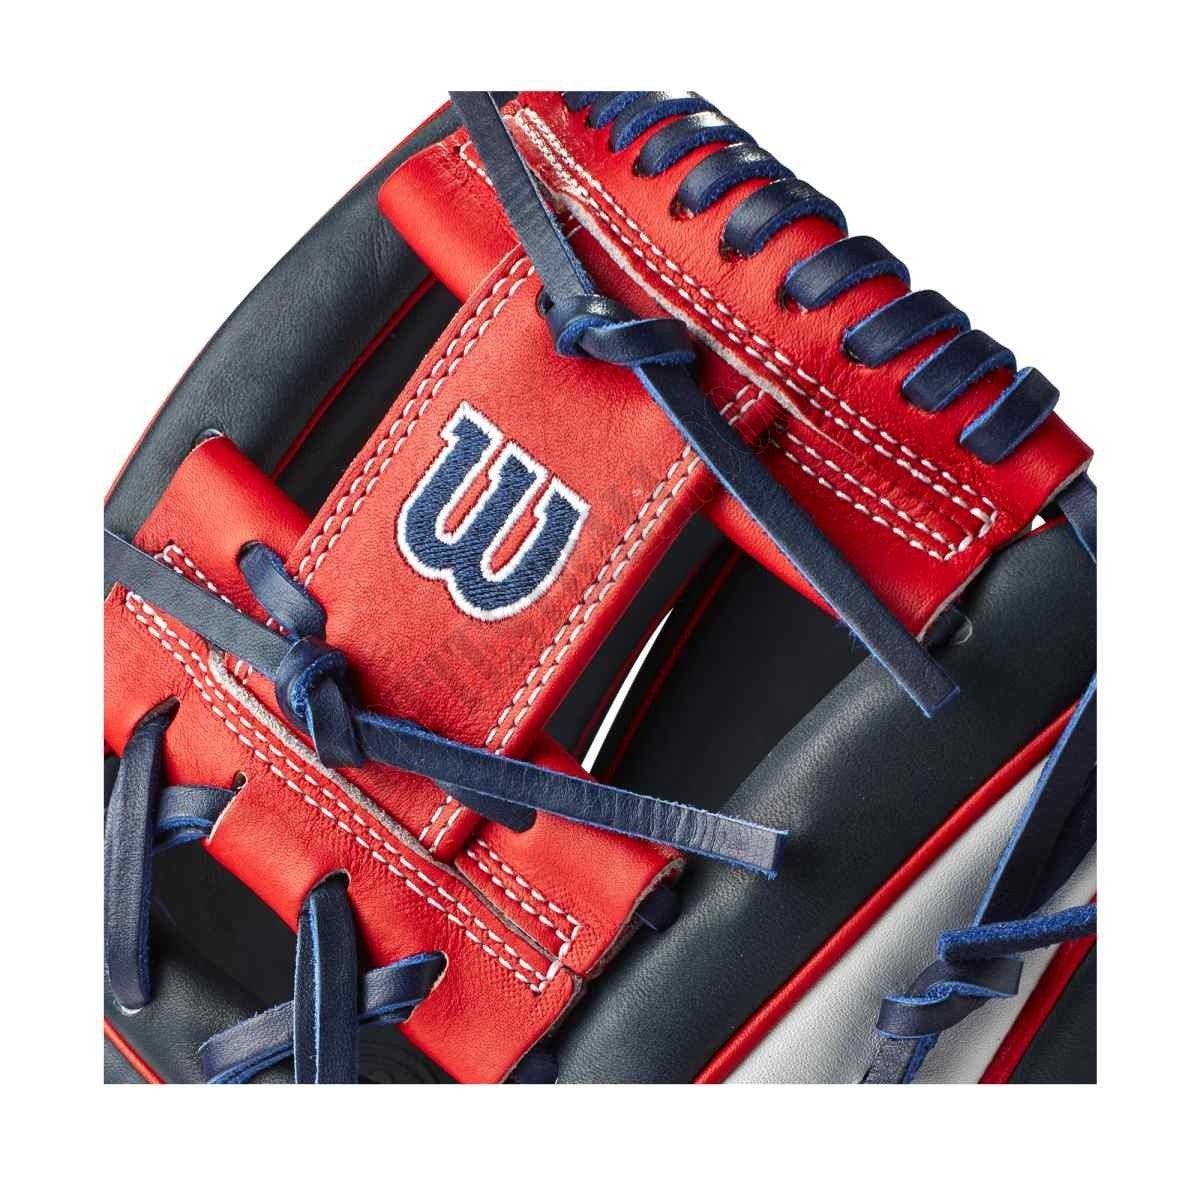 2021 A2000 1786 Cuba 11.5" Infield Baseball Glove - Limited Edition ● Wilson Promotions - -5